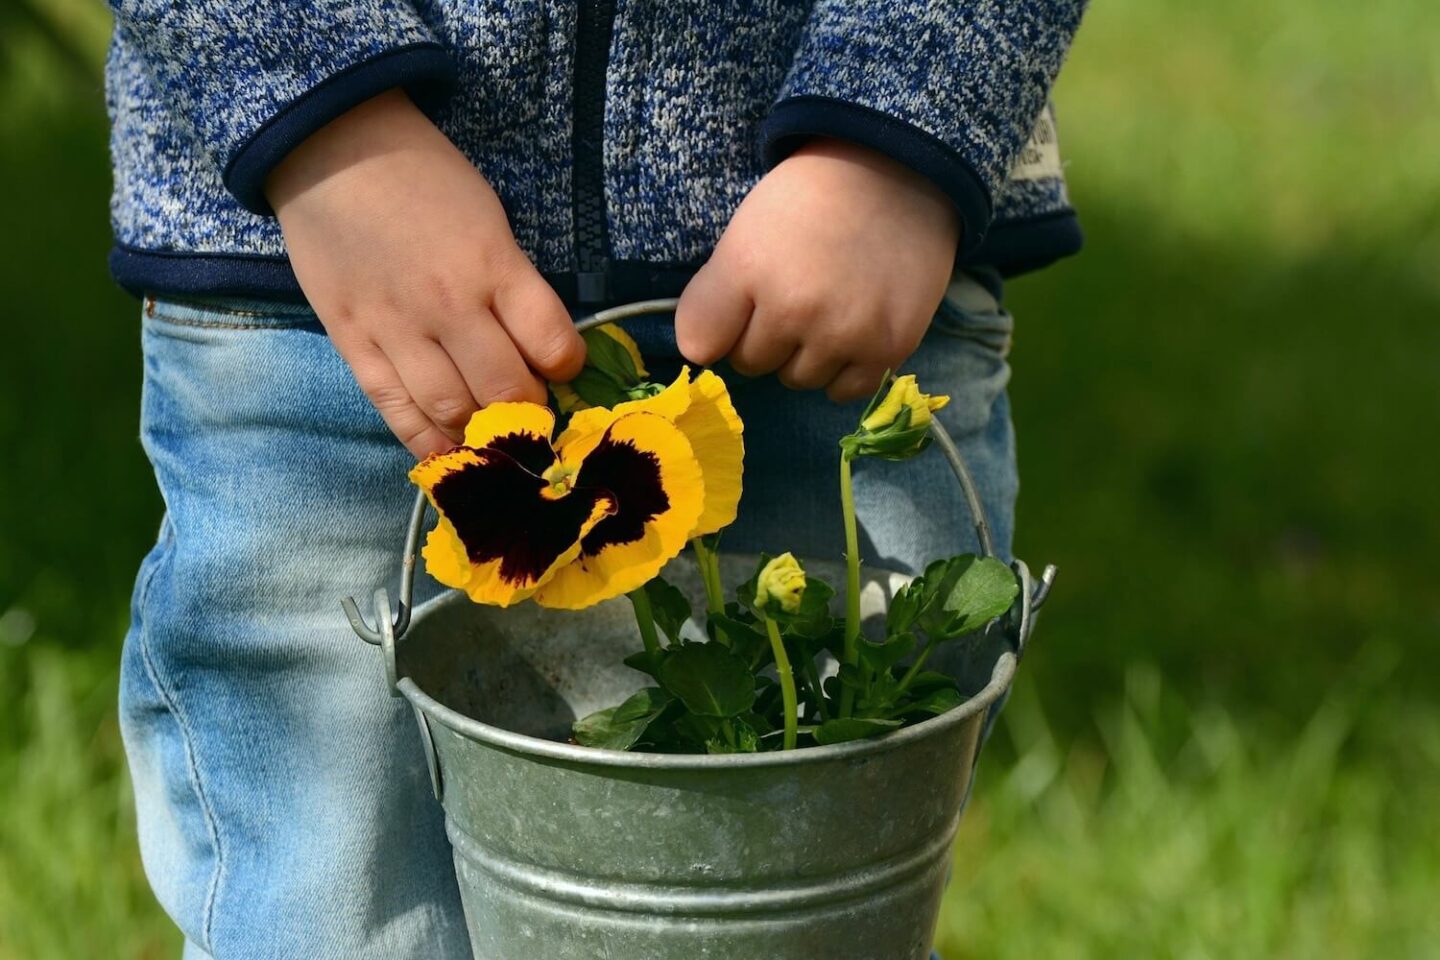 A child holding a metal bucket with a yellow flower on it